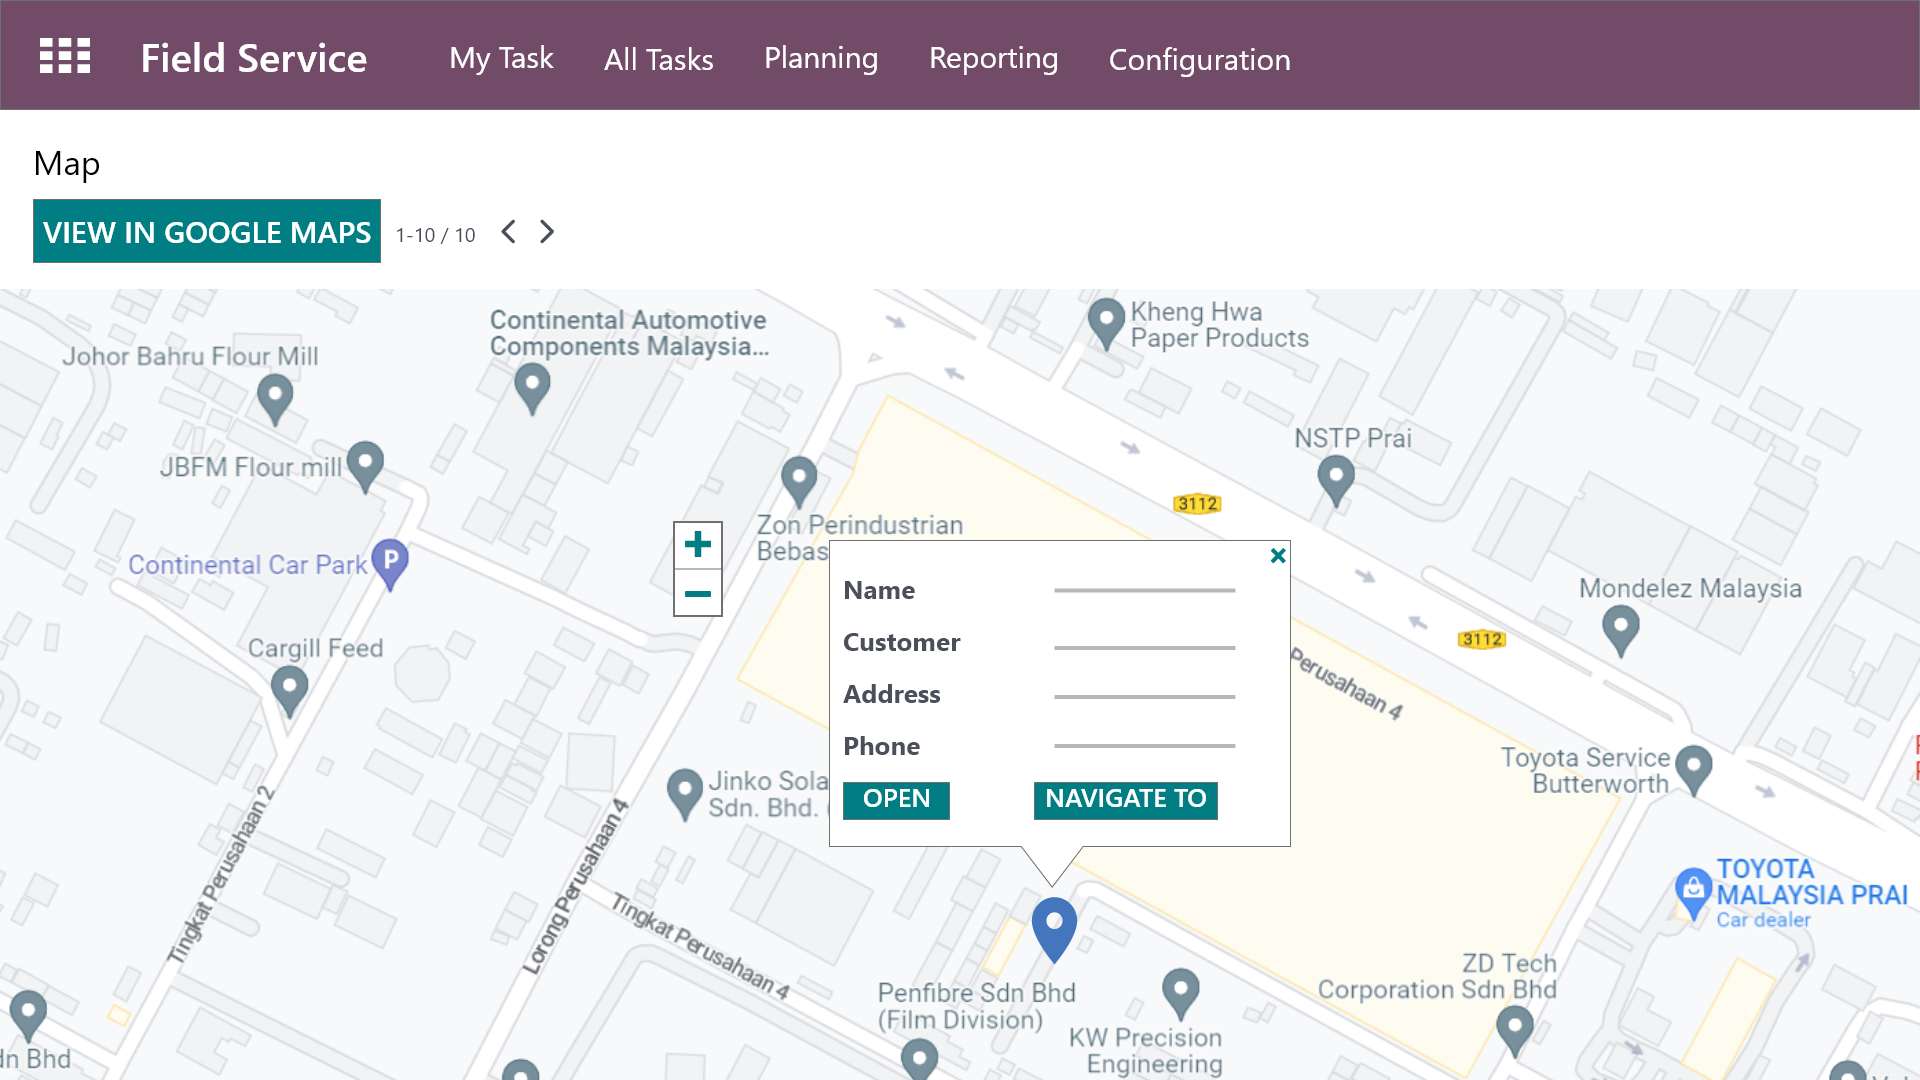 You can perform route planning in Odoo FSM